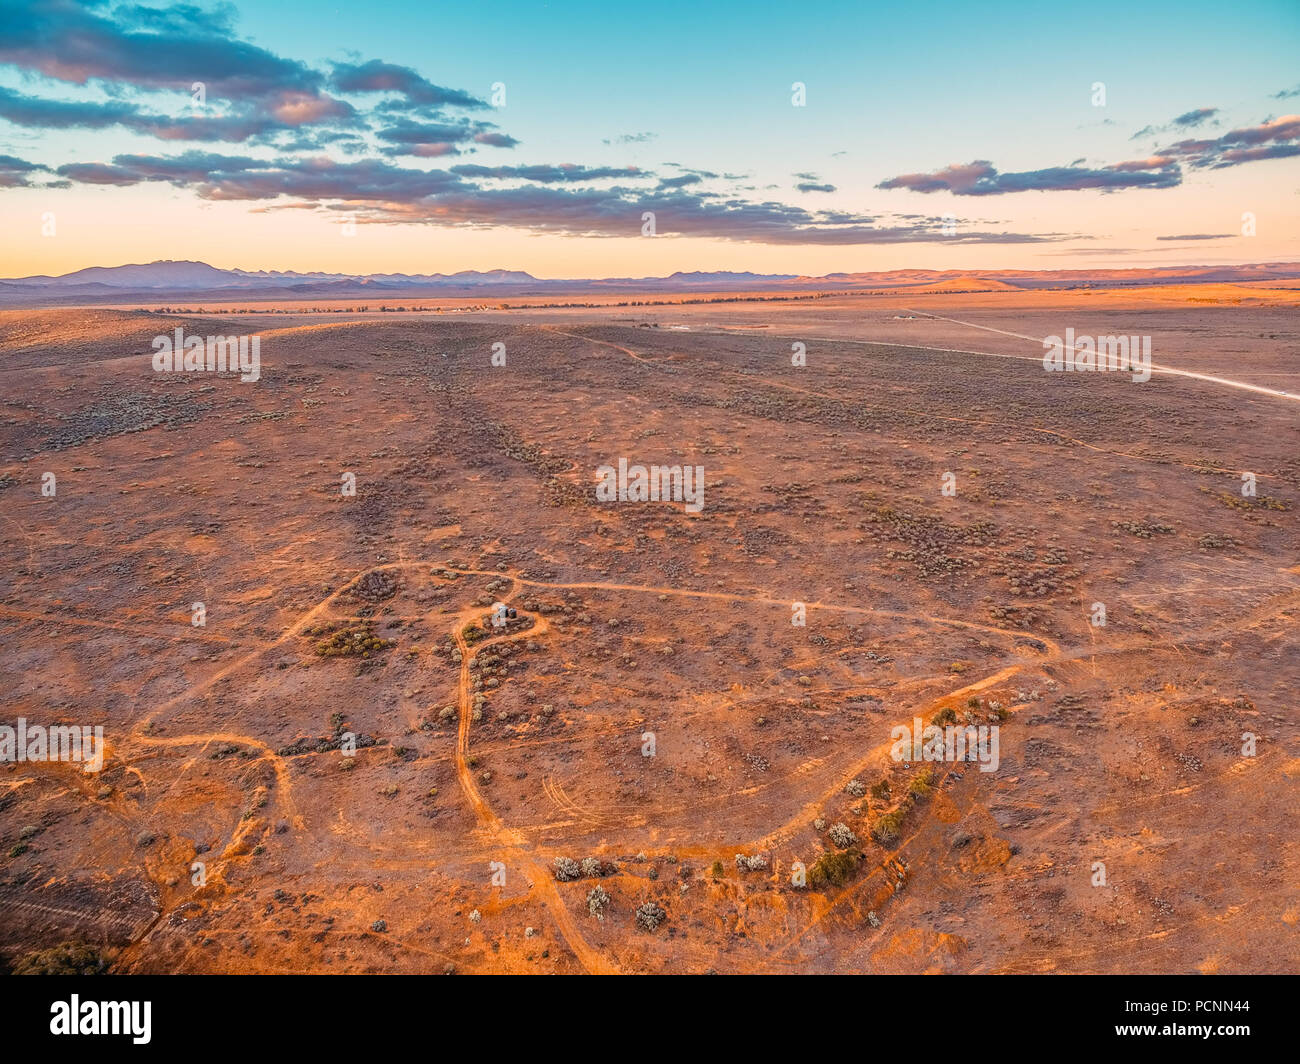 Barren desert land and hills in the distance at beautiful sunset - South Australian aerial landscape Stock Photo